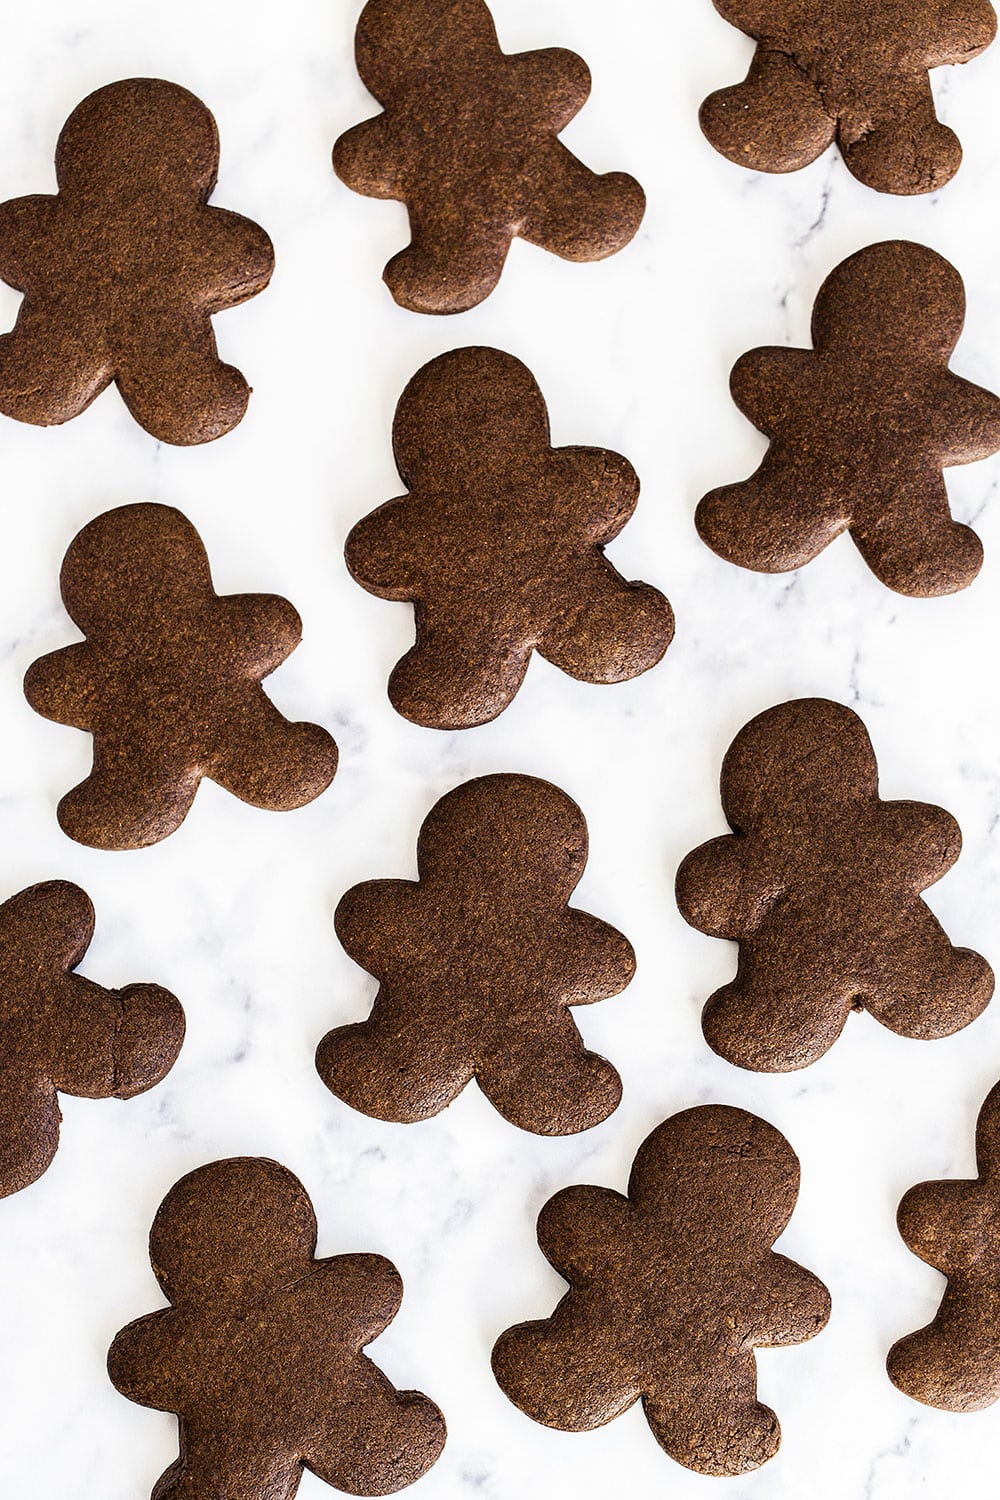 Christmas in July isn't complete without gingerbread cookies!